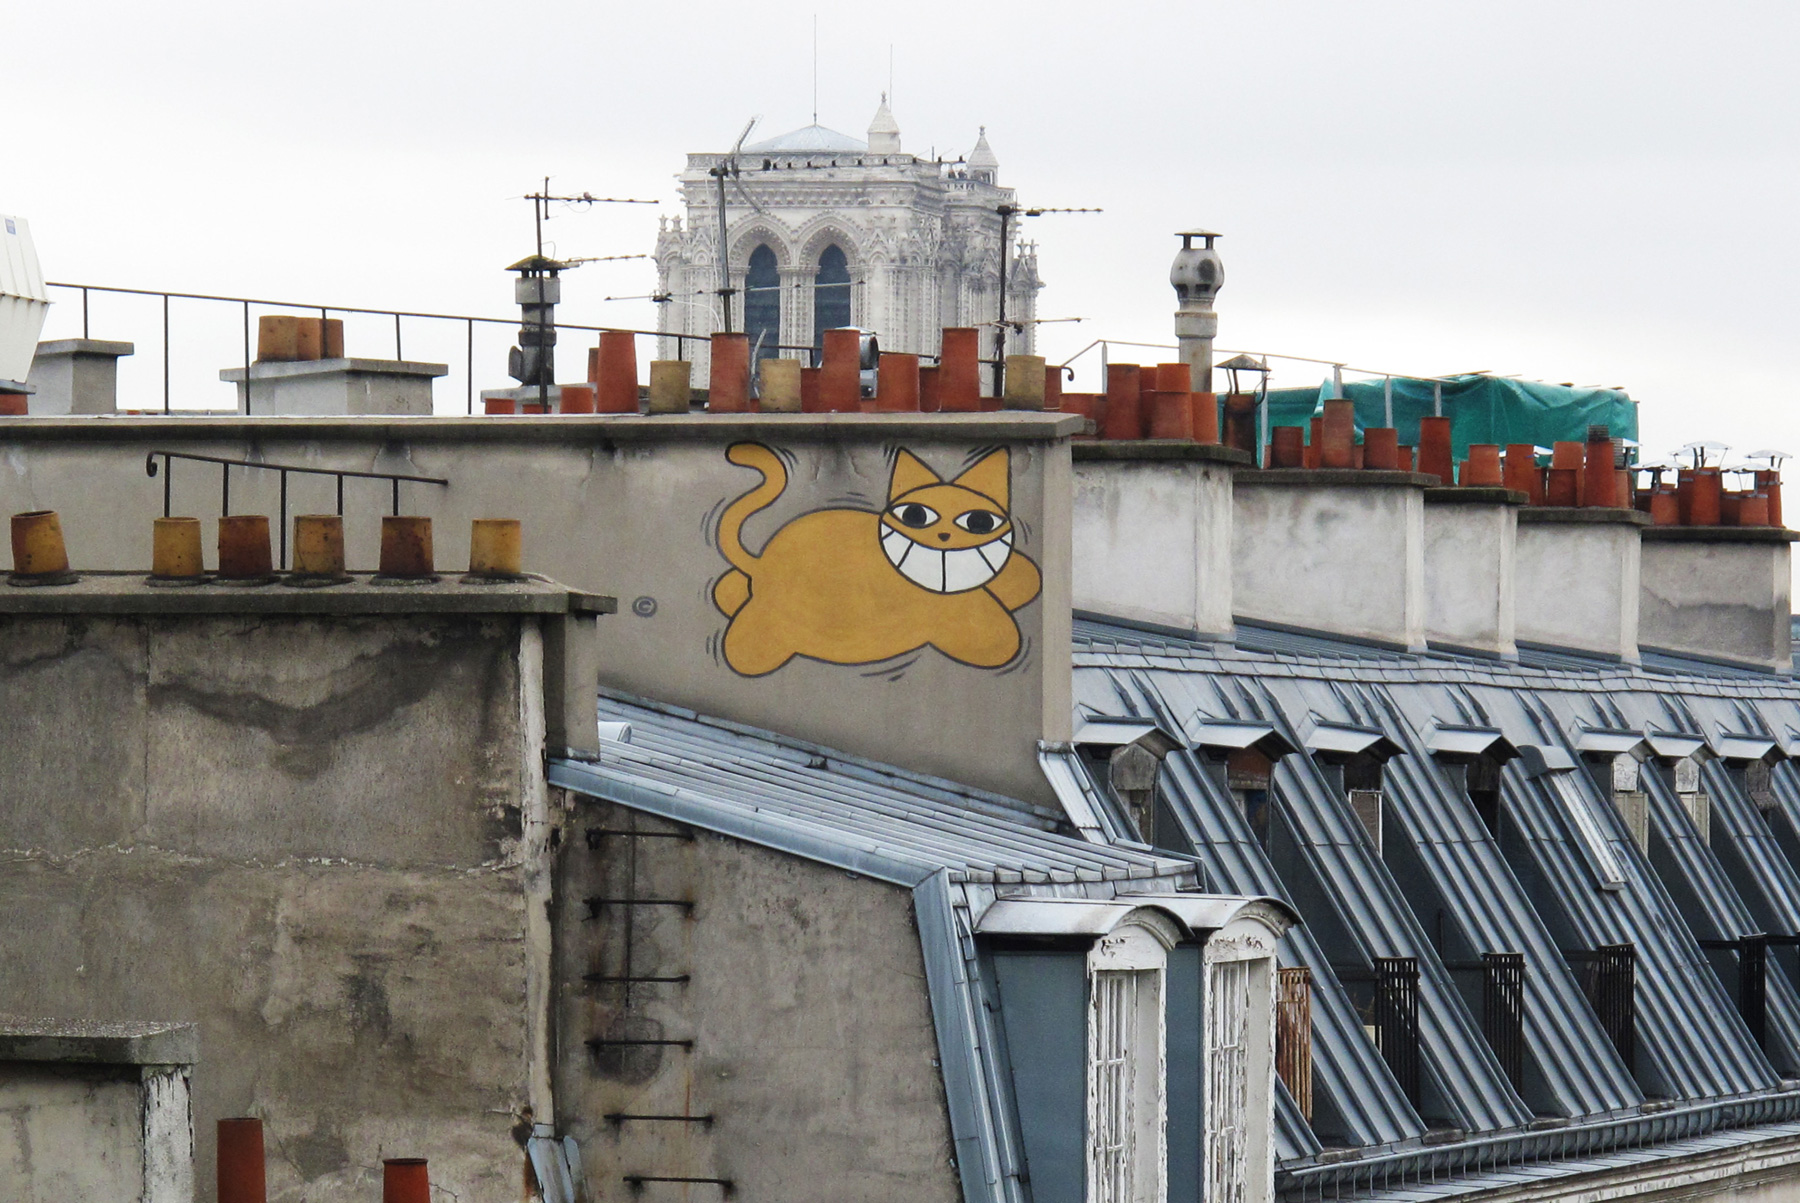 Centre Pompidou view over roofs and smiling cat